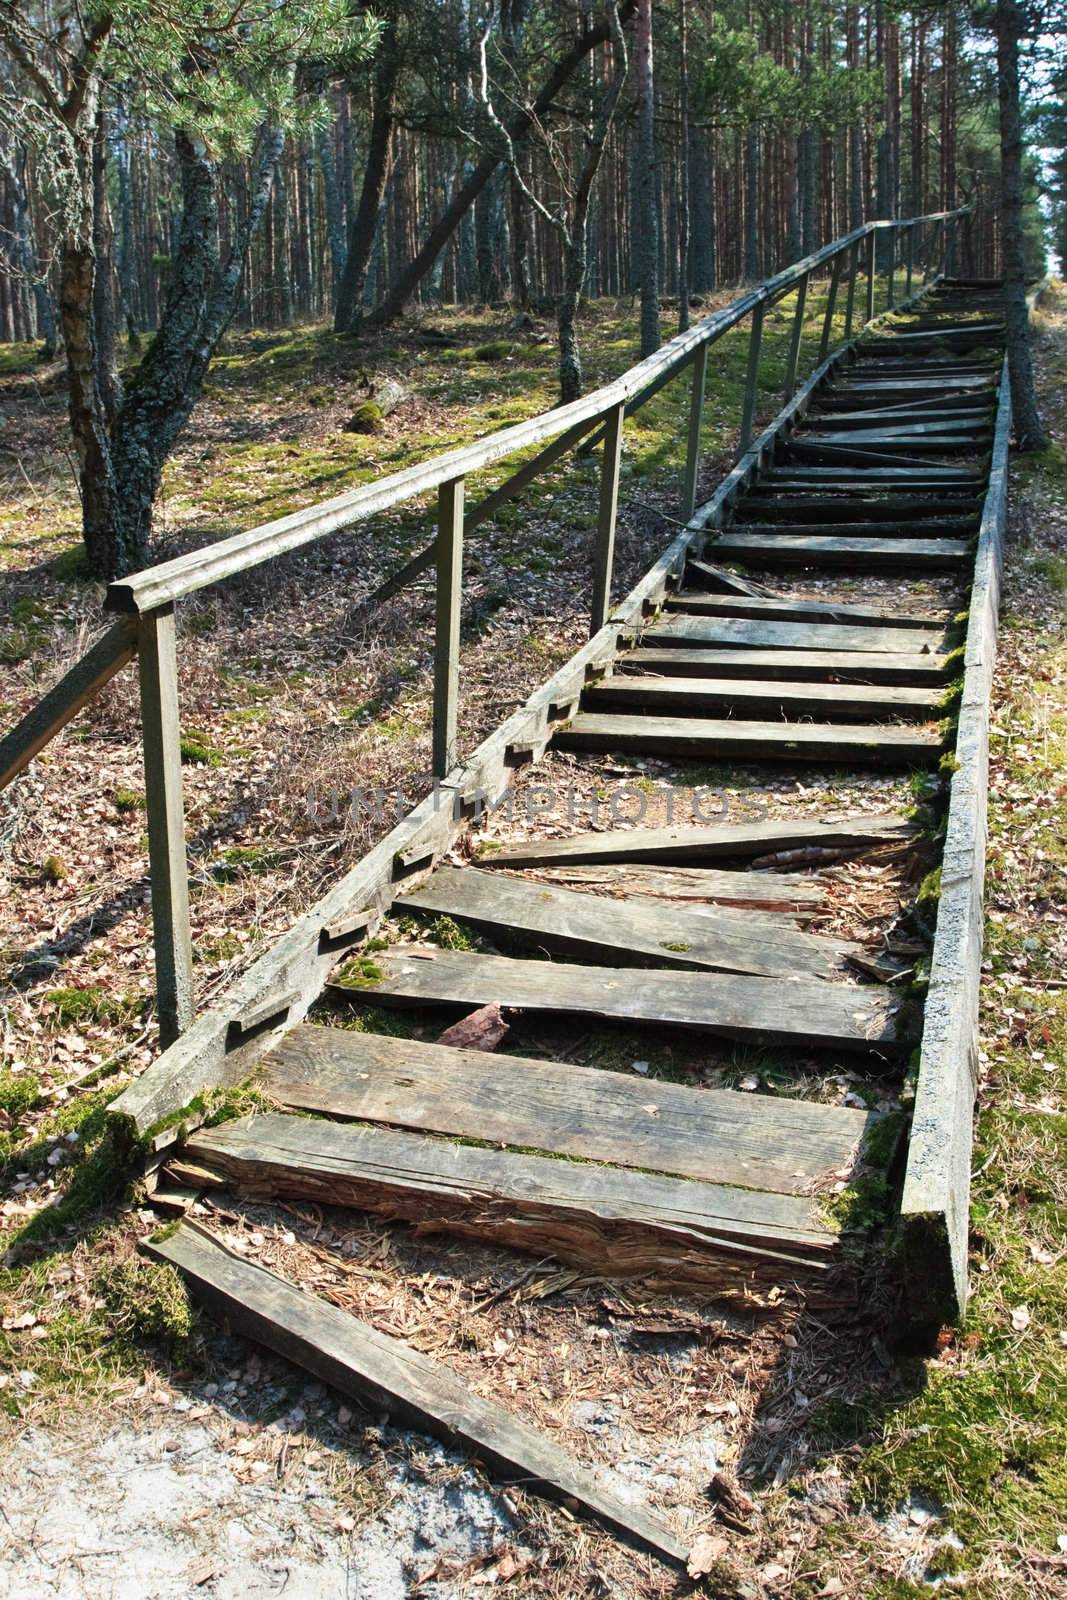 Broken weathered wooden stairs at pine forest